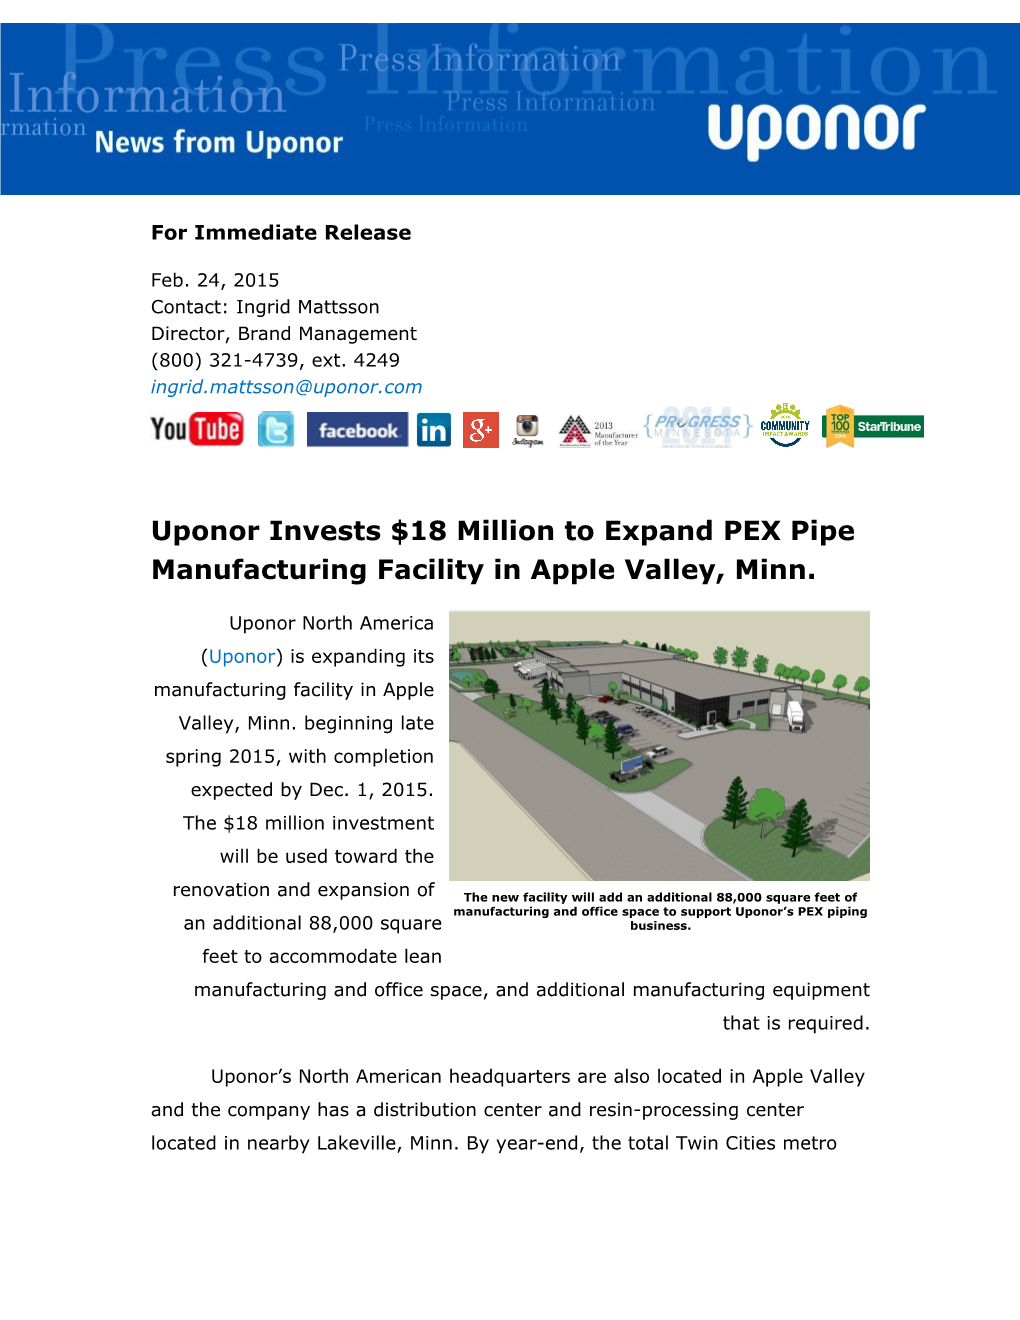 Uponor Expanding PEX Piping Manufacturing Facility